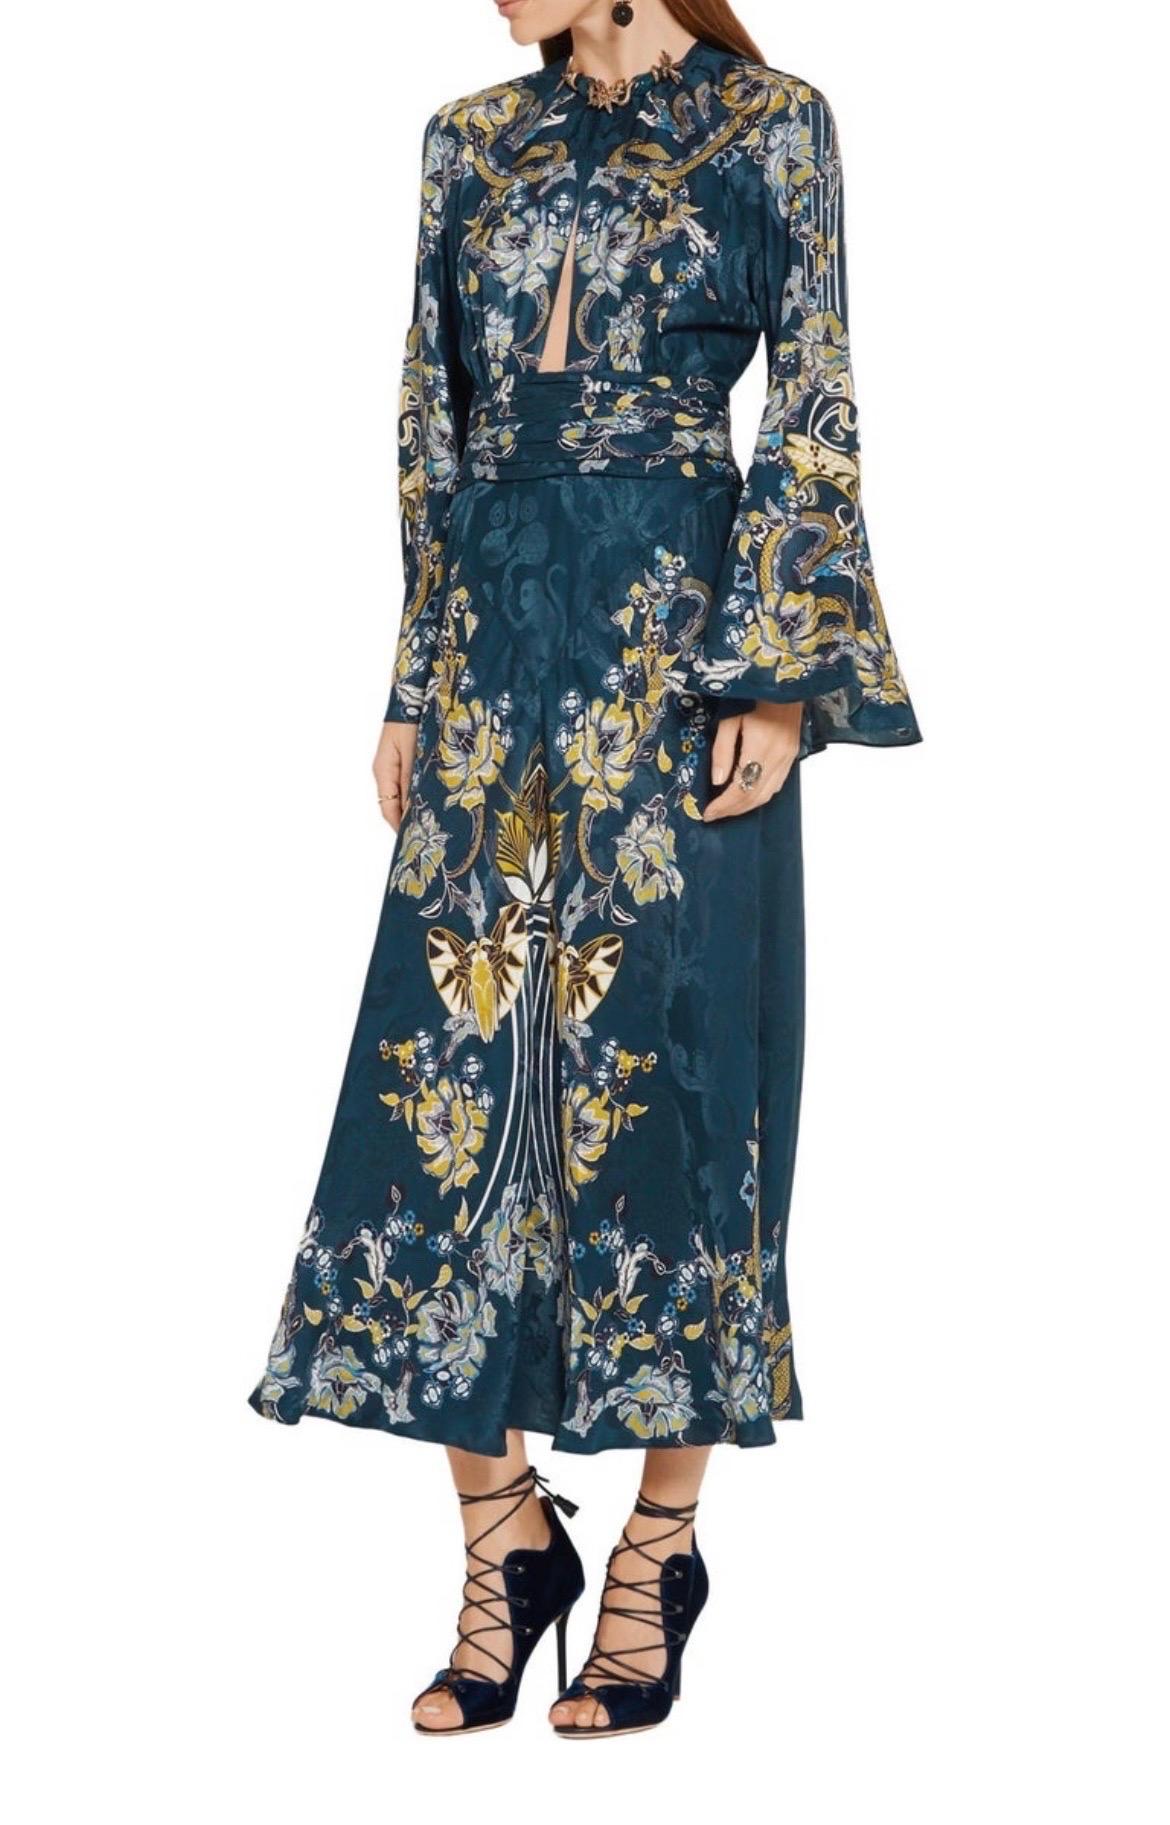 Roberto Cavalli 
Stunning gown with embellishments around the neck.
52% viscose , 48% silk
Made in Italy
Unlined
Front and back keyhole with button closures
Engraved metal charm detail at neckline
Hidden back zip closure
Bell sleeves with slit